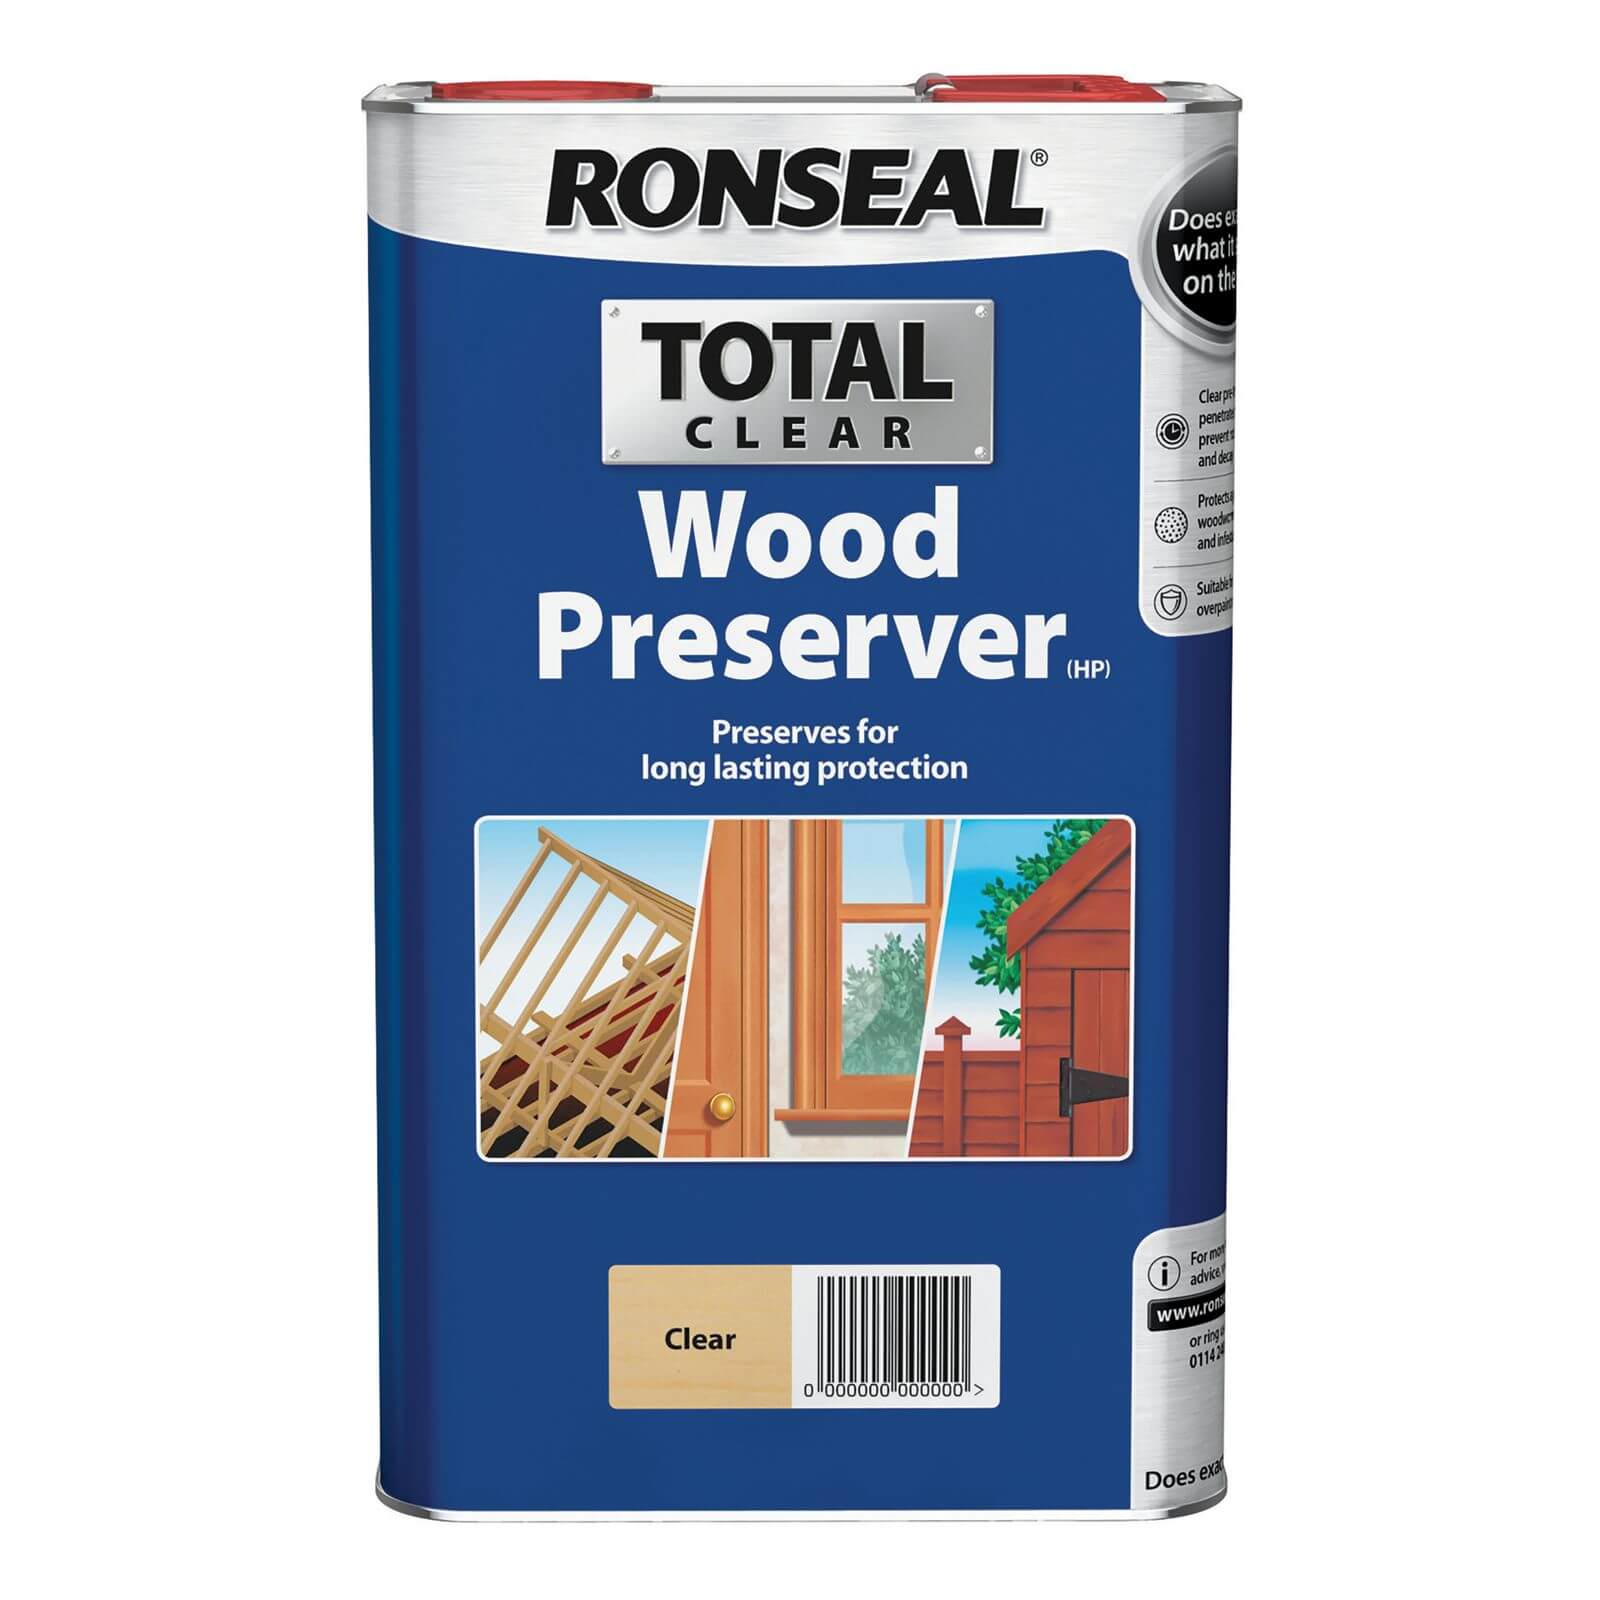 Ronseal Total Wood Preserver Clear - 5L